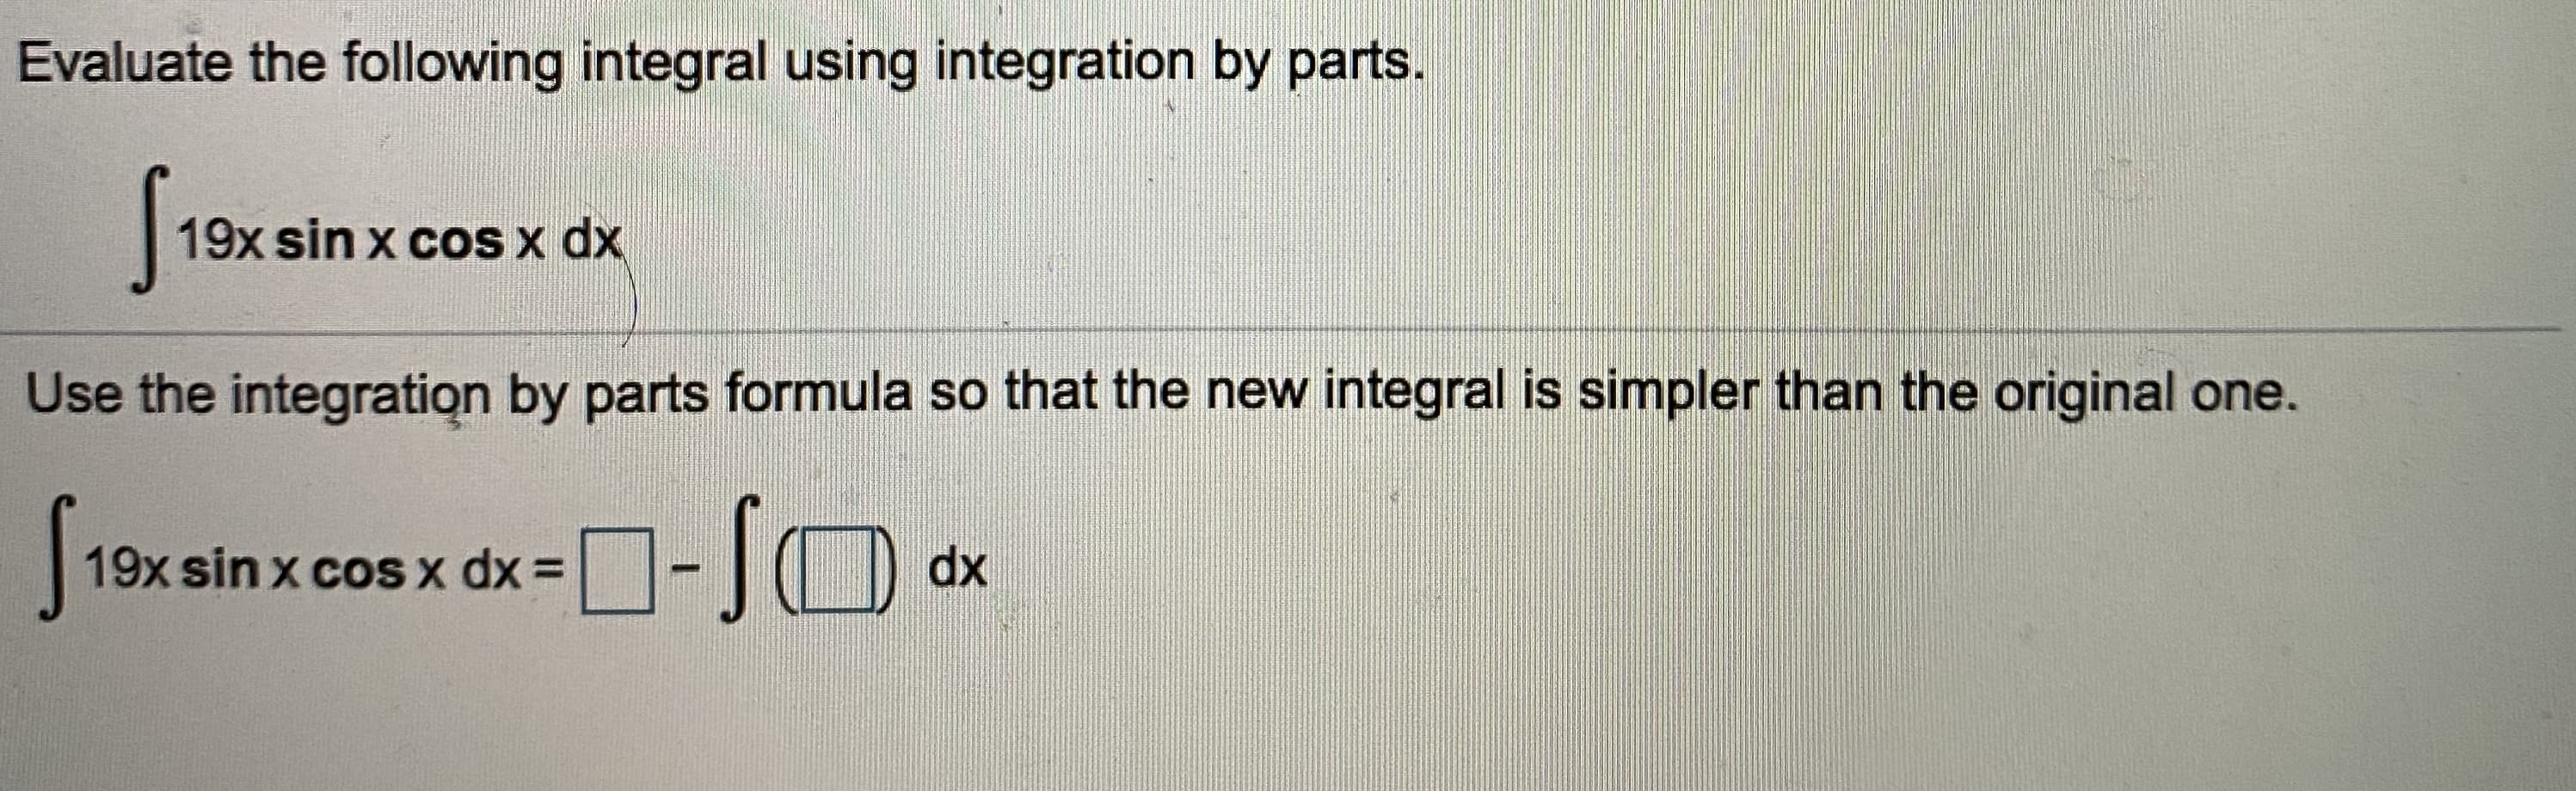 Evaluate the following integral using integration by parts.
19x sin x cOS x dx
Use the integration by parts formula so that the new integral is simpler than the original one.
19x sin x coS x dx =
dx
